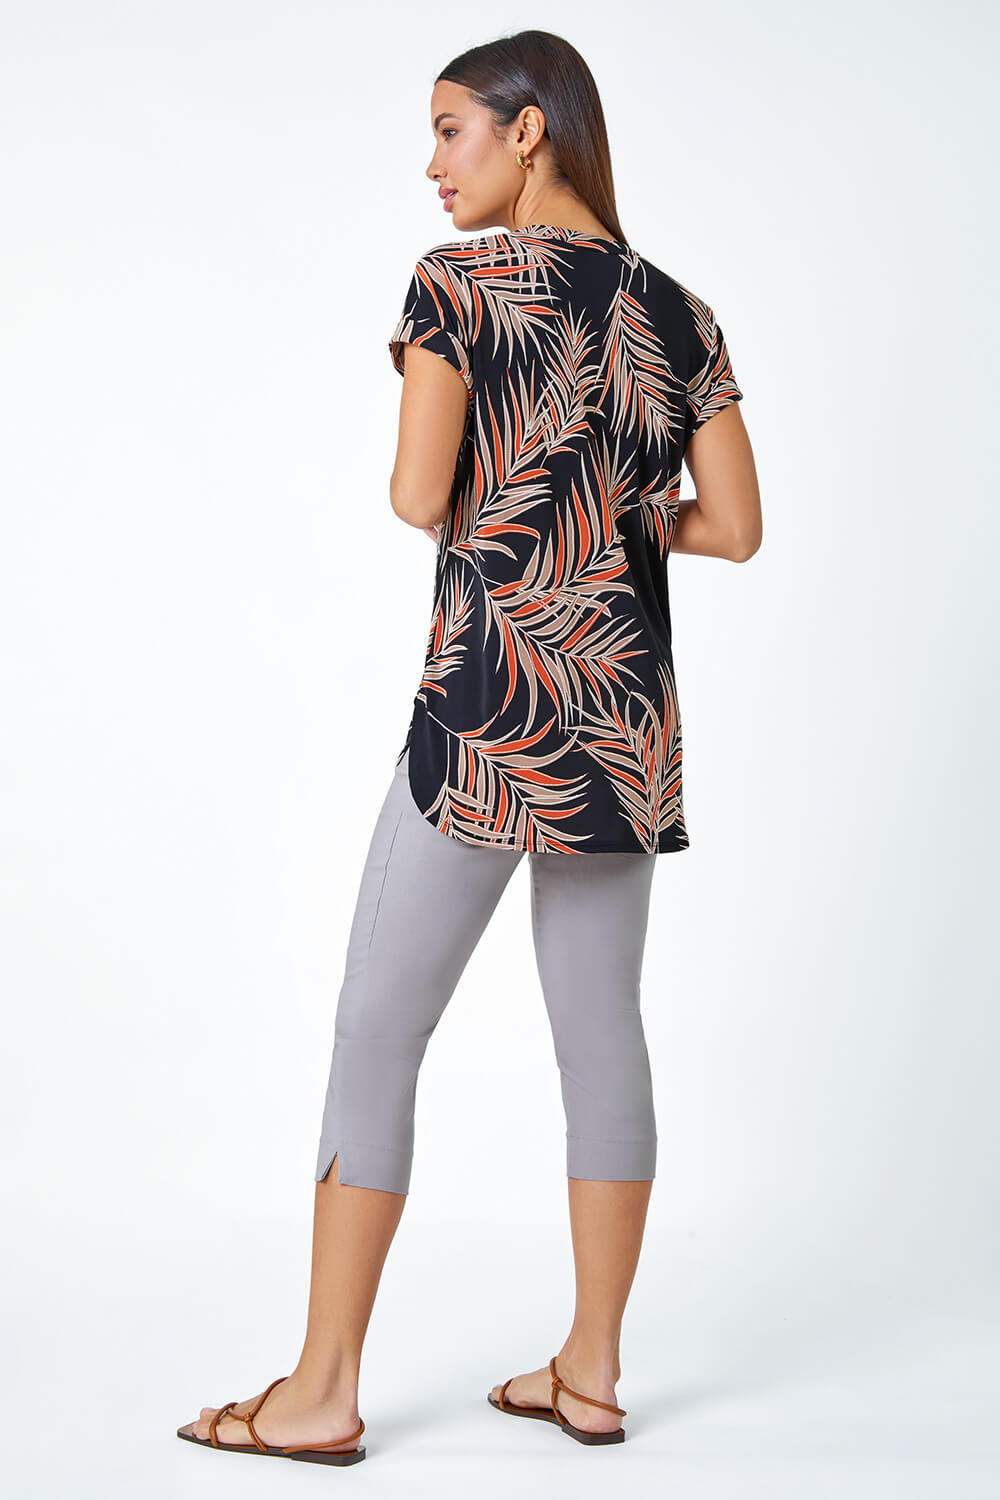 Rust Textured Tropical Print Overshirt Stretch Top, Image 3 of 5